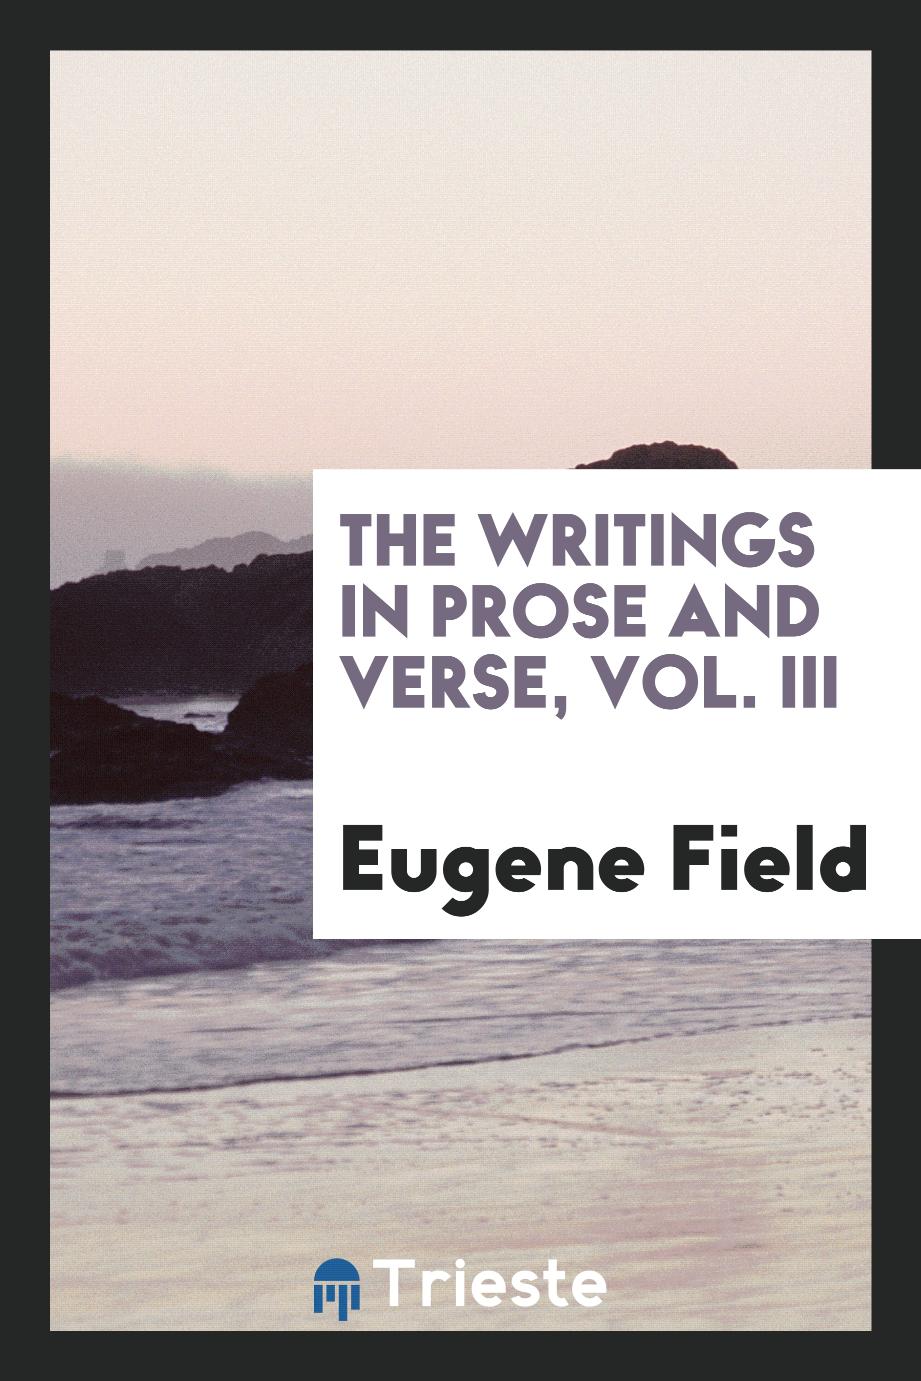 Eugene Field - The writings in prose and verse, Vol. III